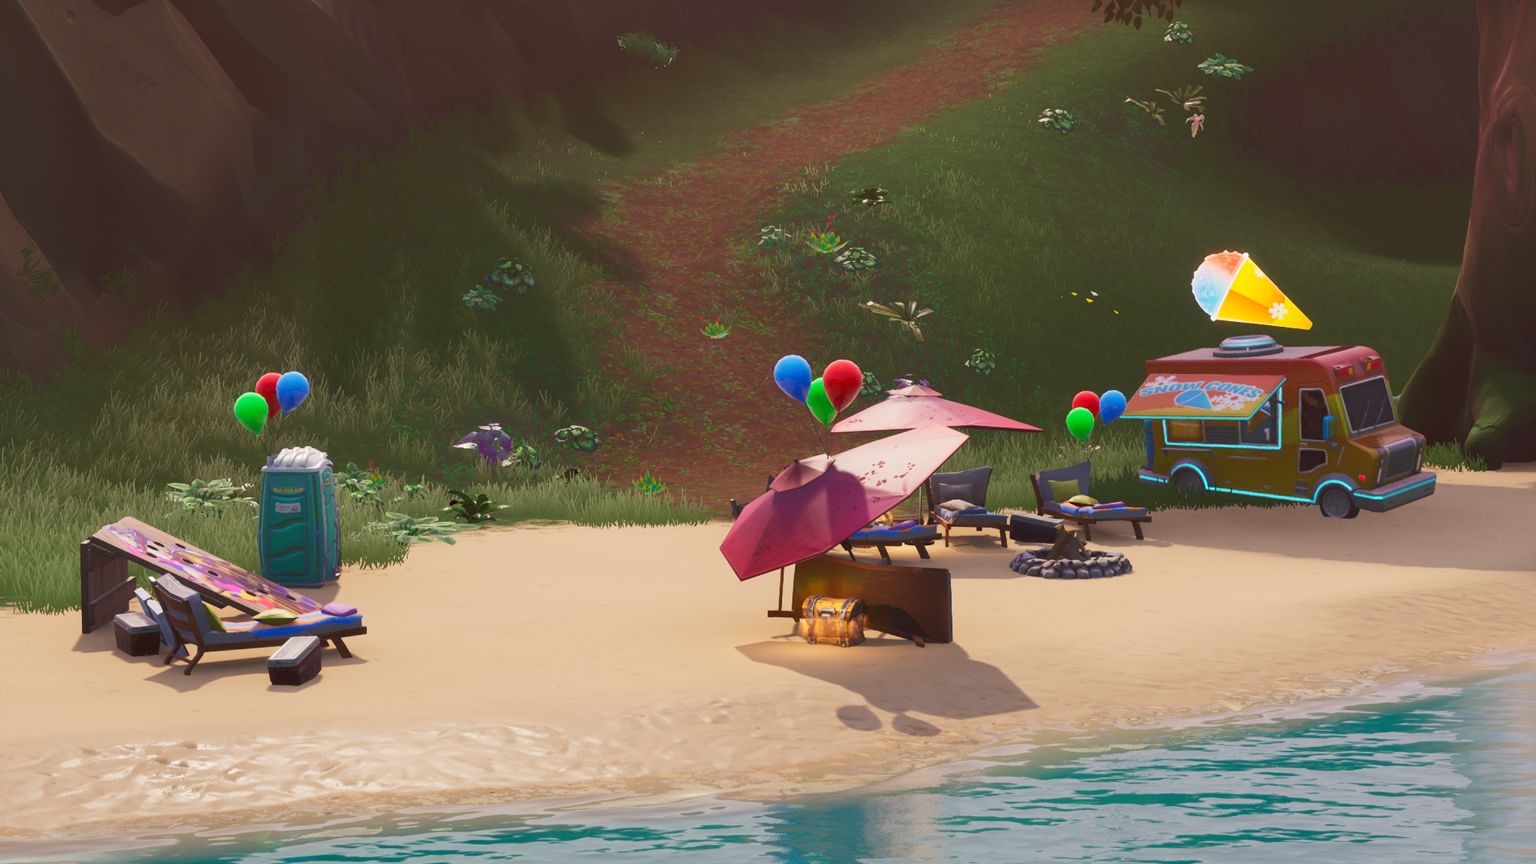 Fortnite 14 Days of Summer - Dance at different beach parties location guide